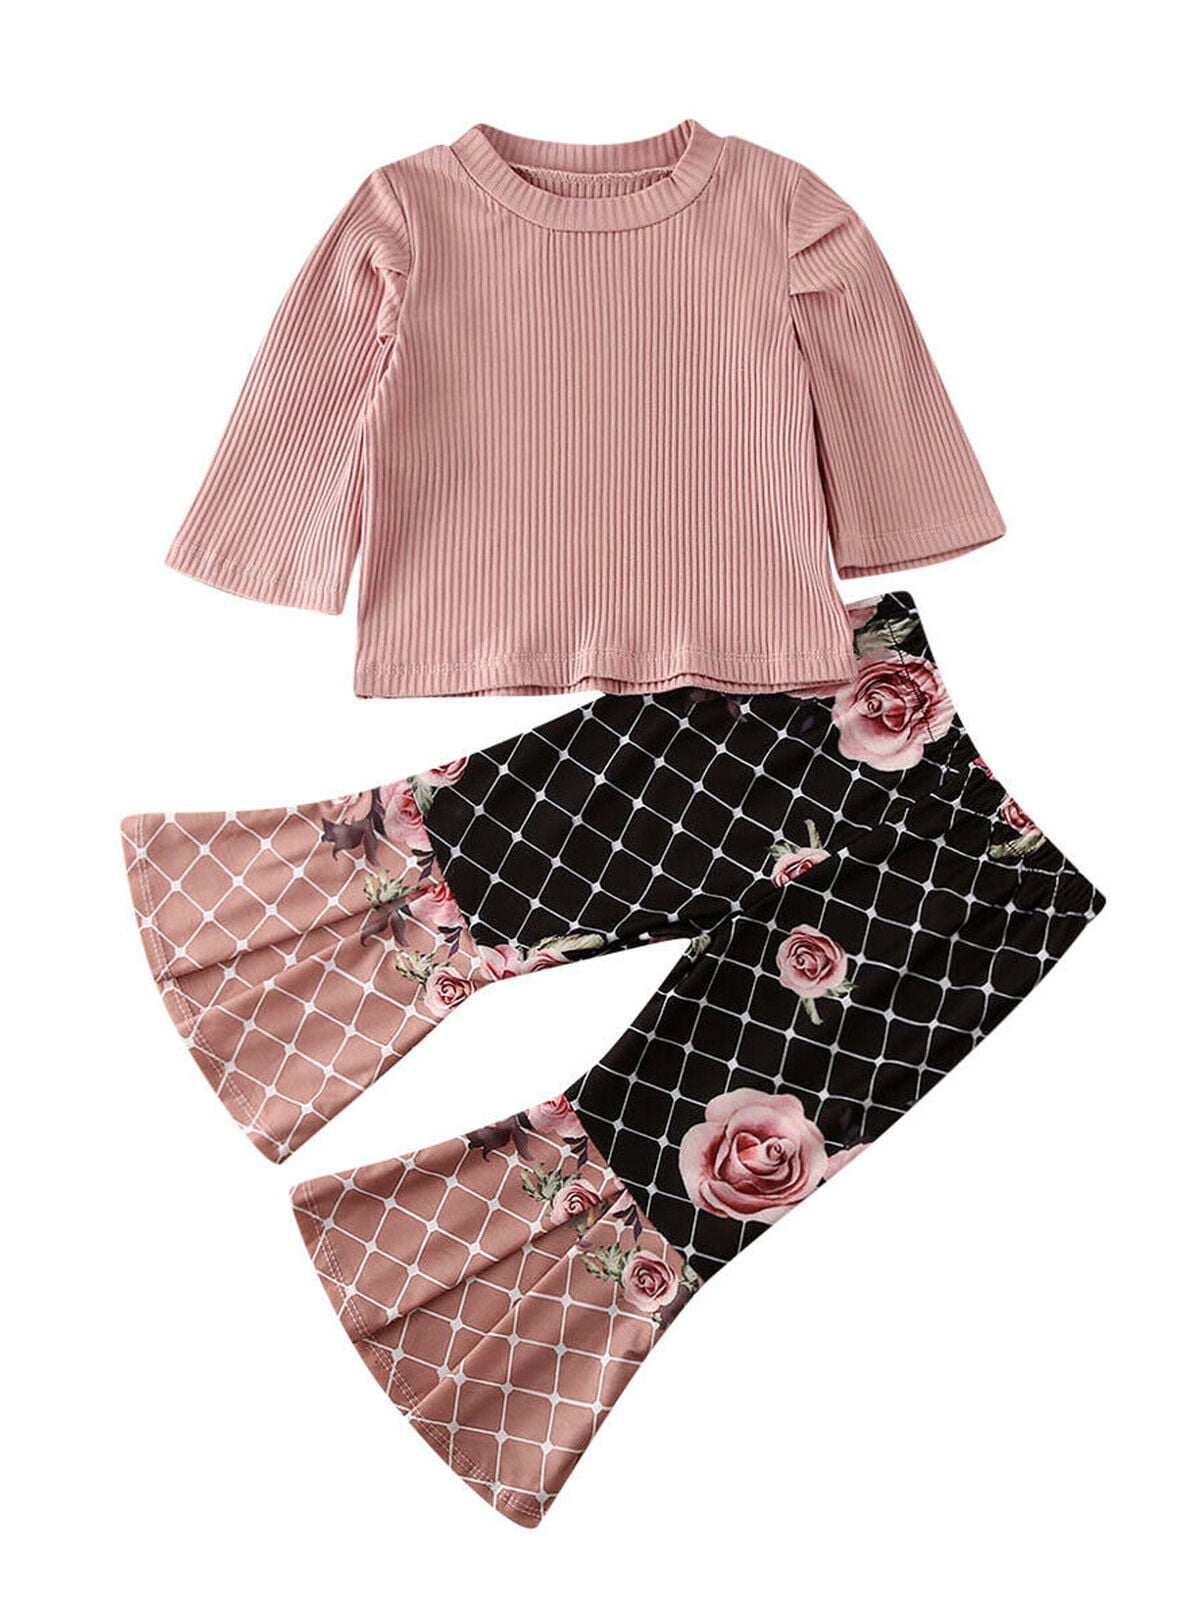 bilison Baby Girl Clothes Floral Ruffle Tops Solid Color Pants with Headband Outfit Sets